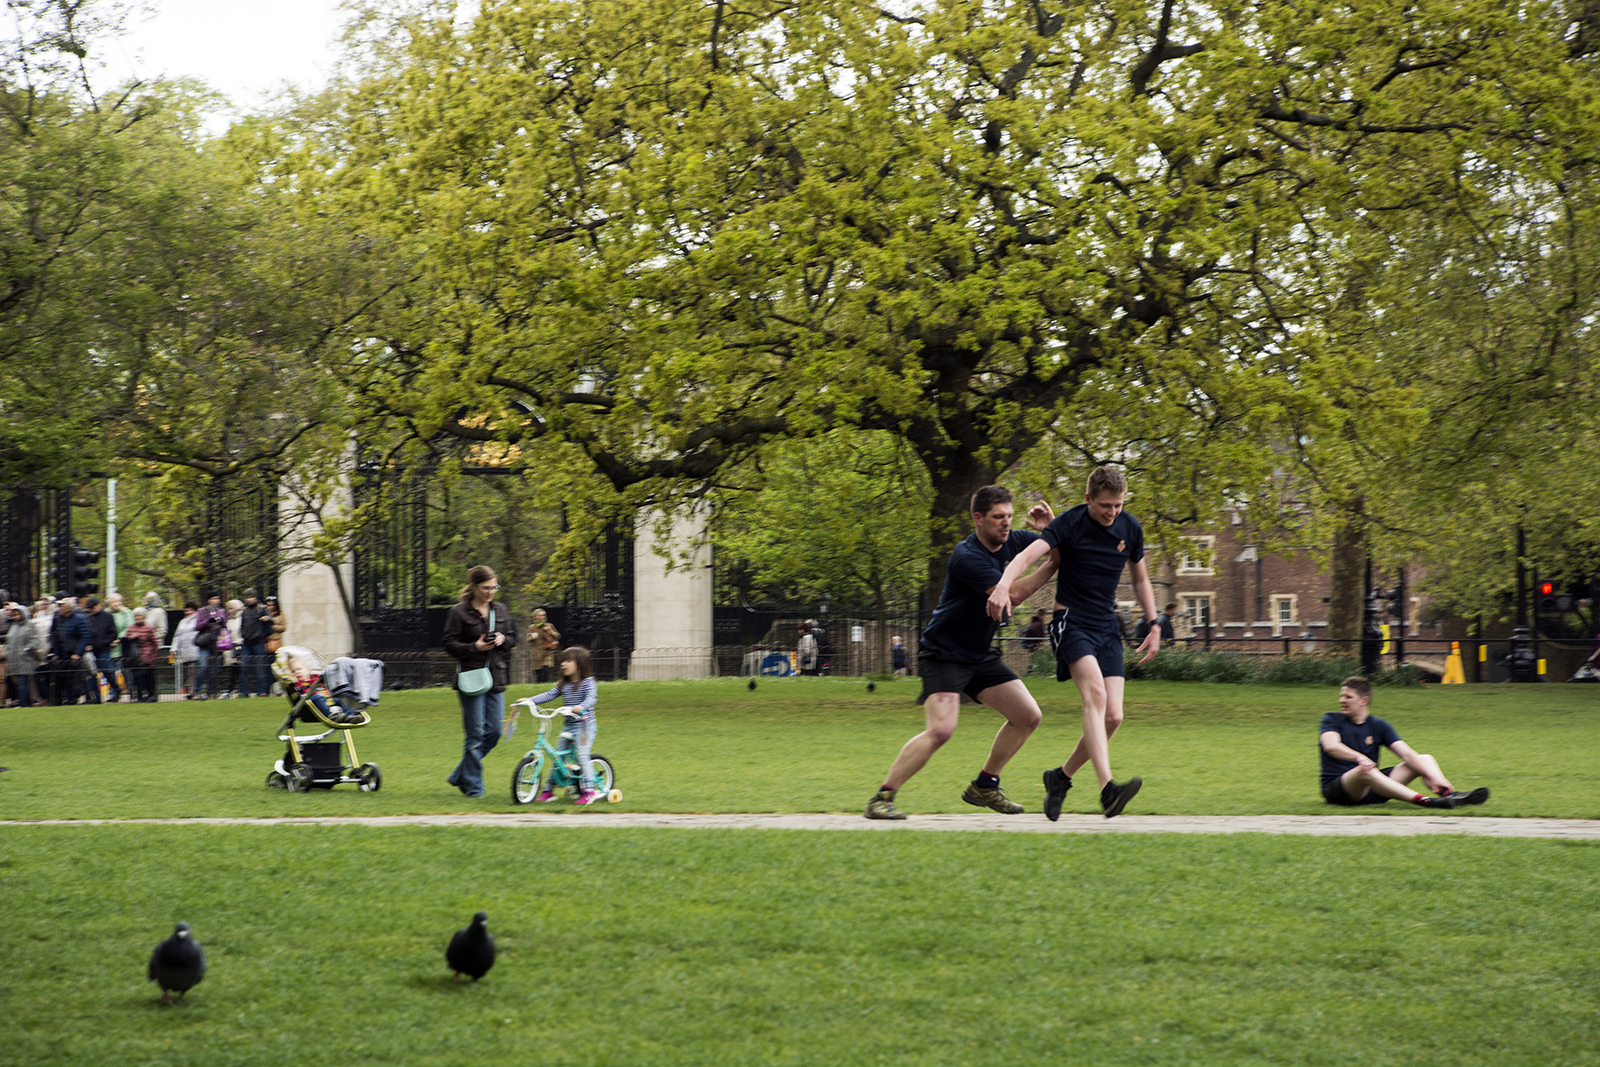 2017-04-17-Westminster_St-Jamess-Park_People_Spring-Two-pidgeons